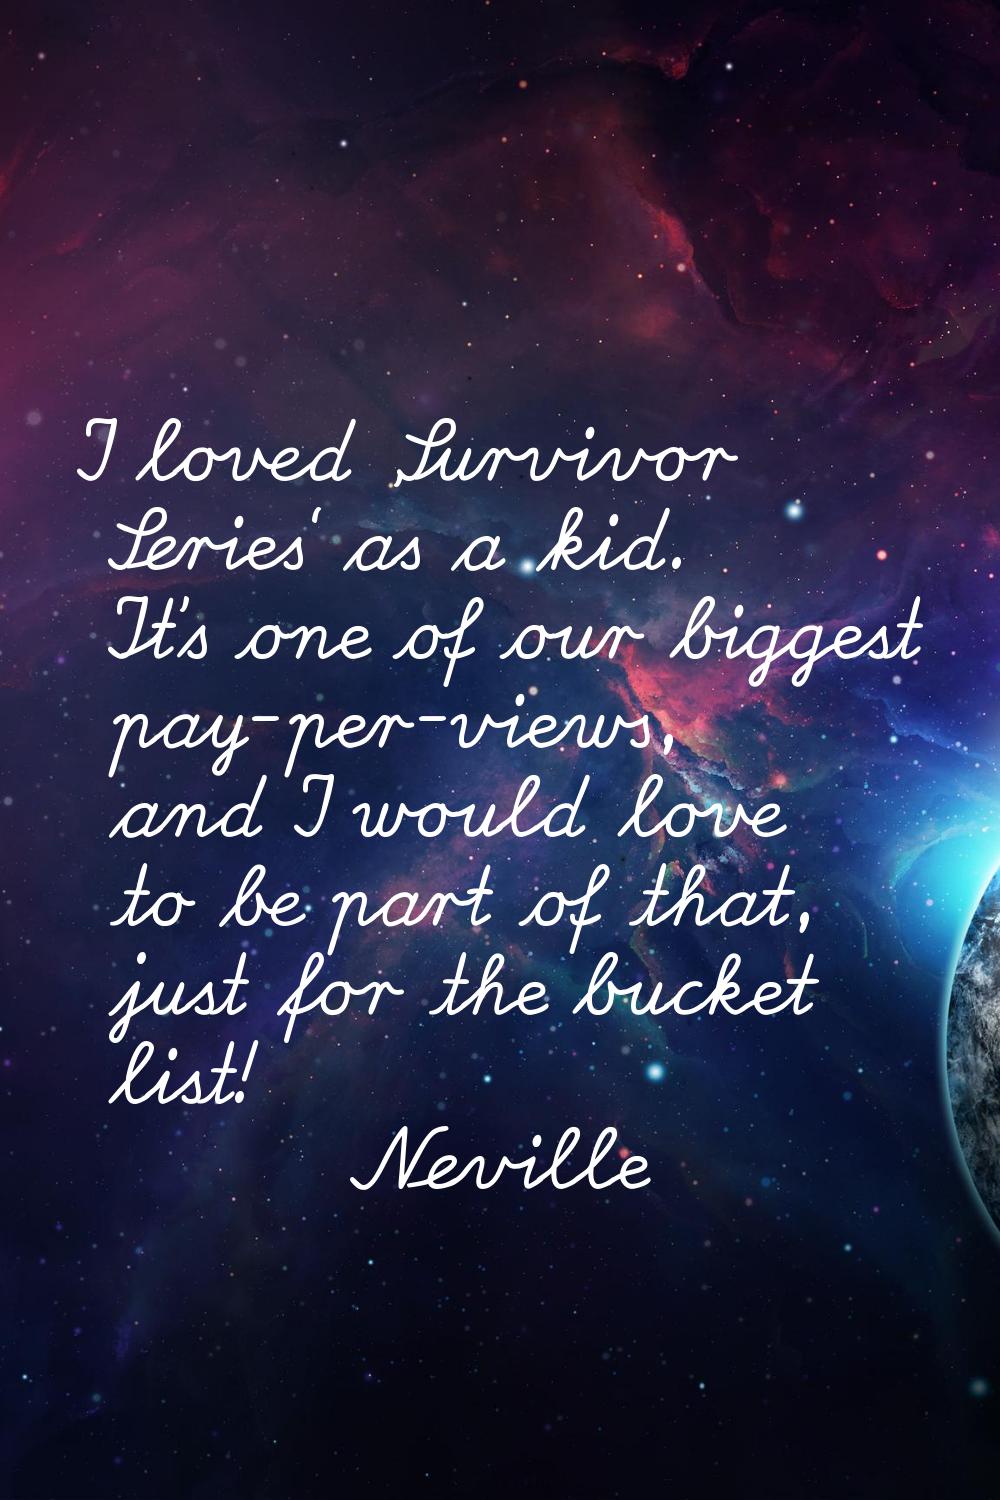 I loved 'Survivor Series' as a kid. It's one of our biggest pay-per-views, and I would love to be p